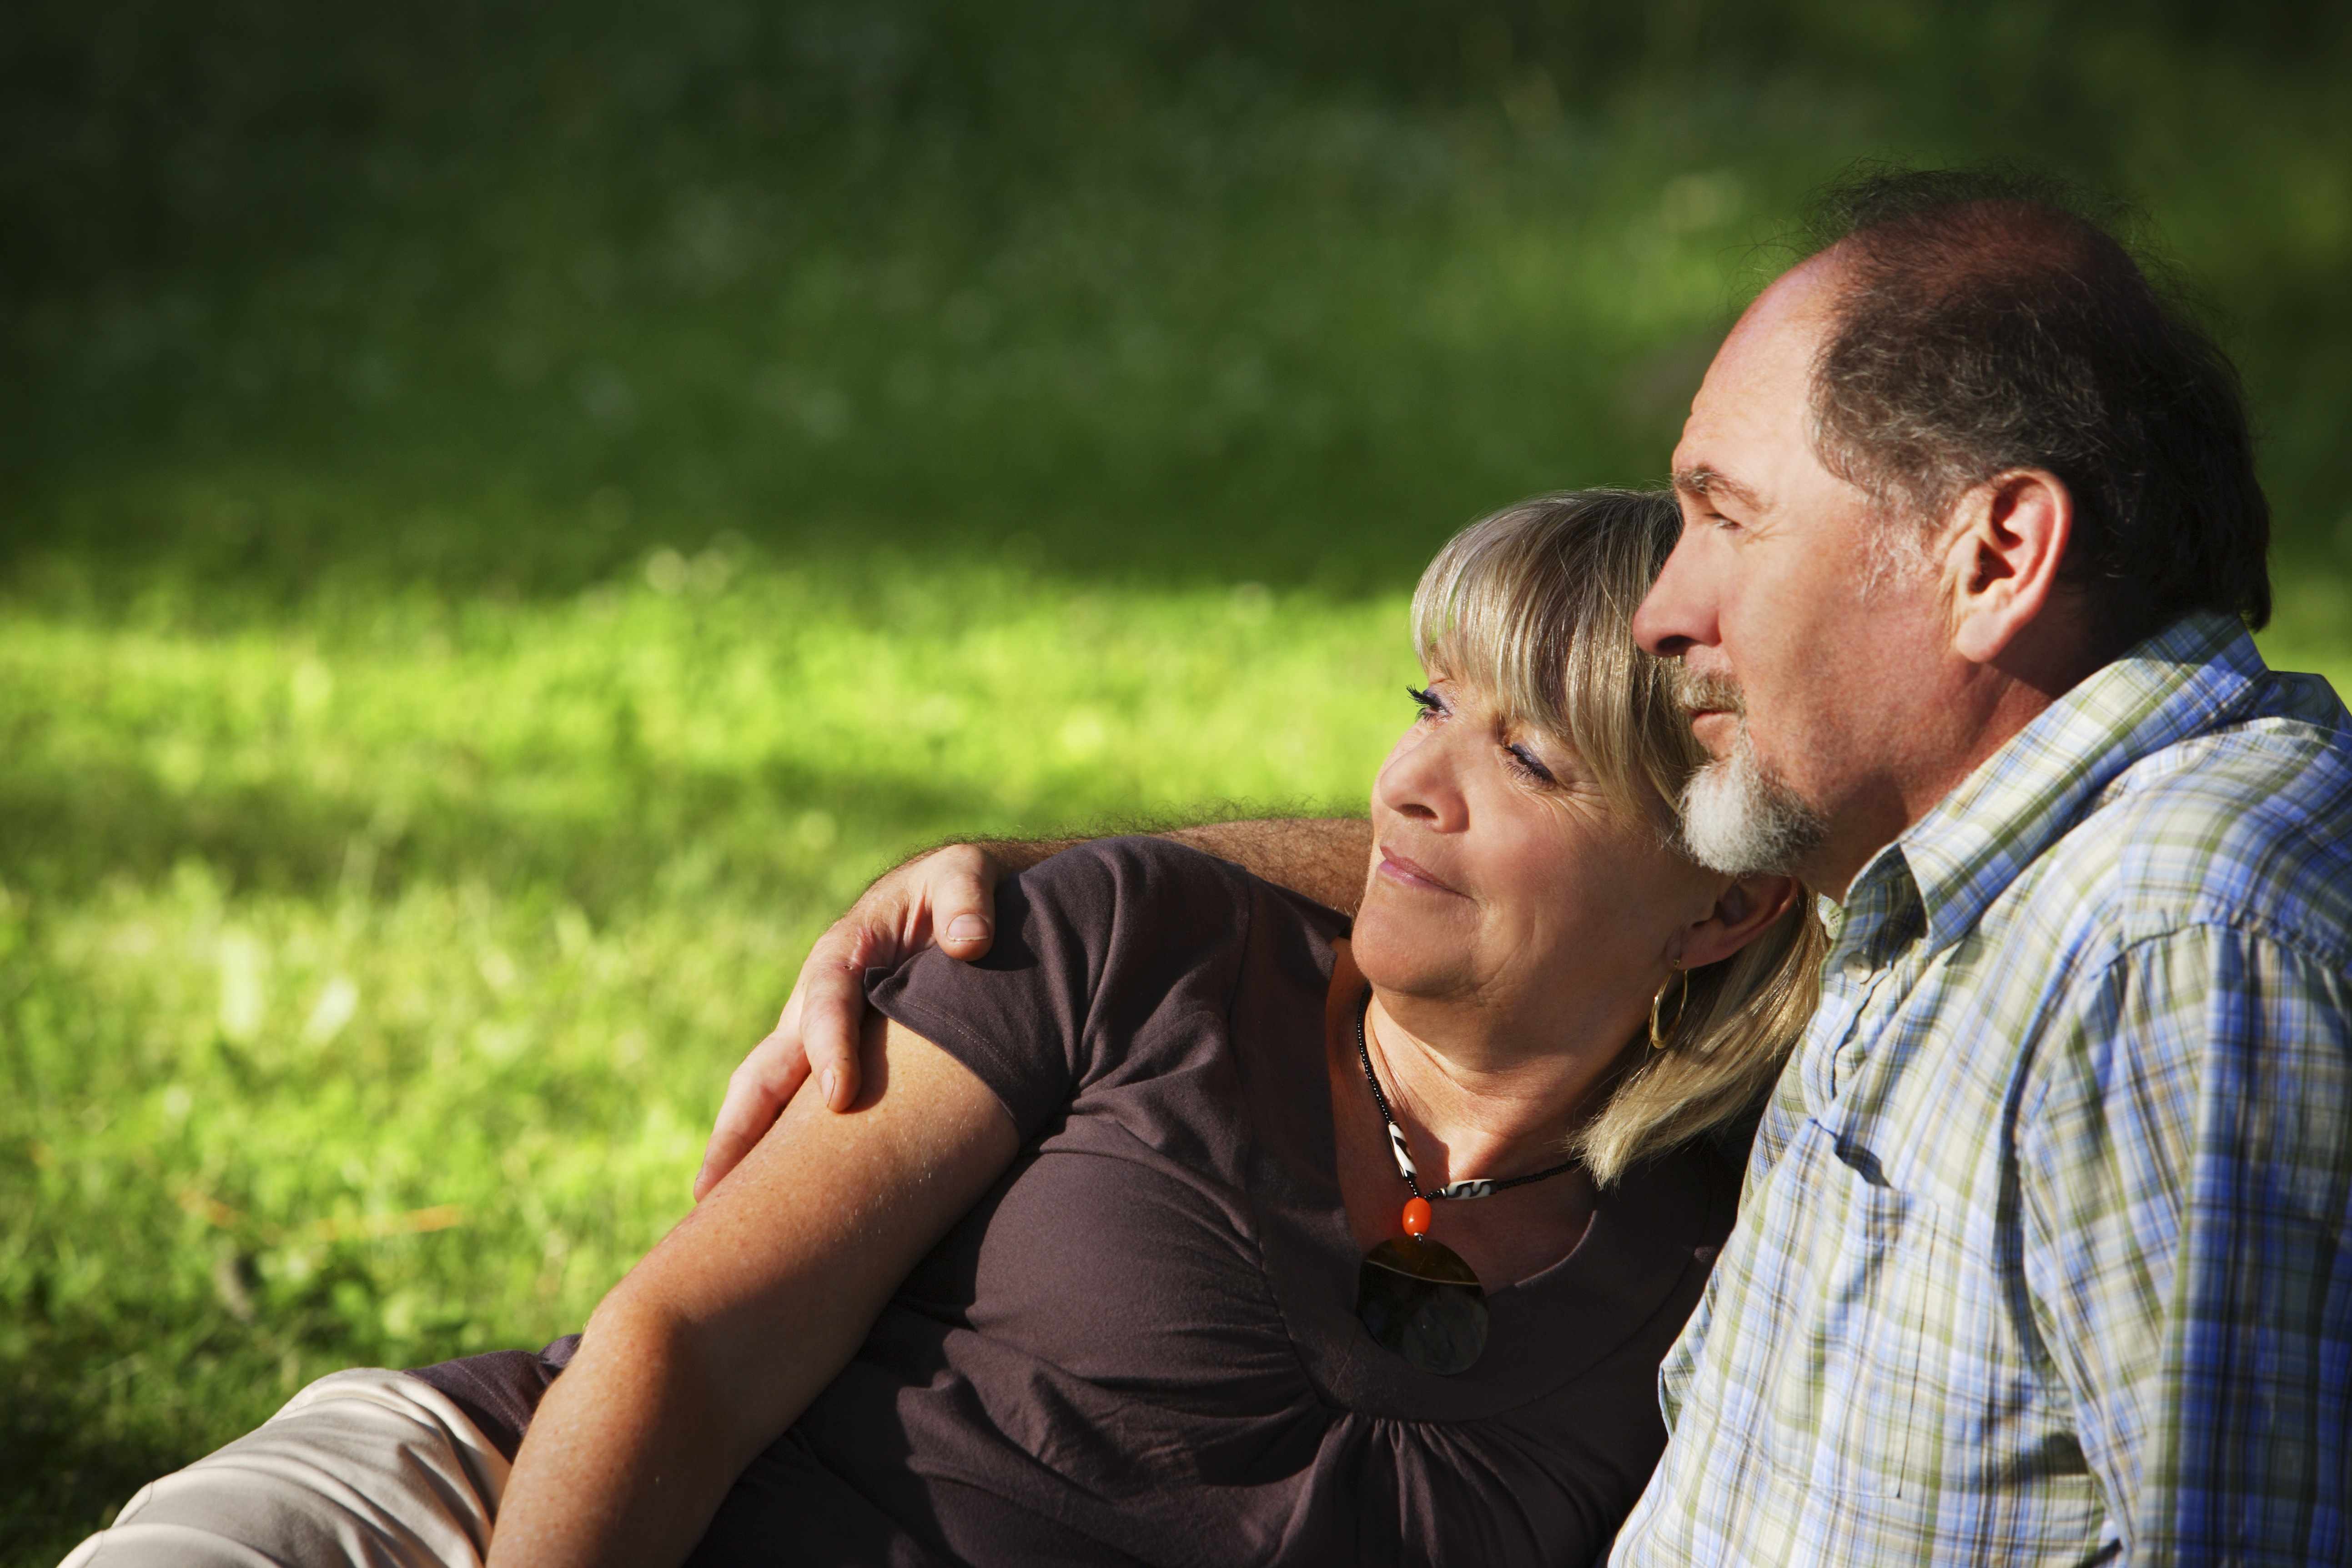 a middle-aged man and woman in each other's arms sitting outdoors in a park